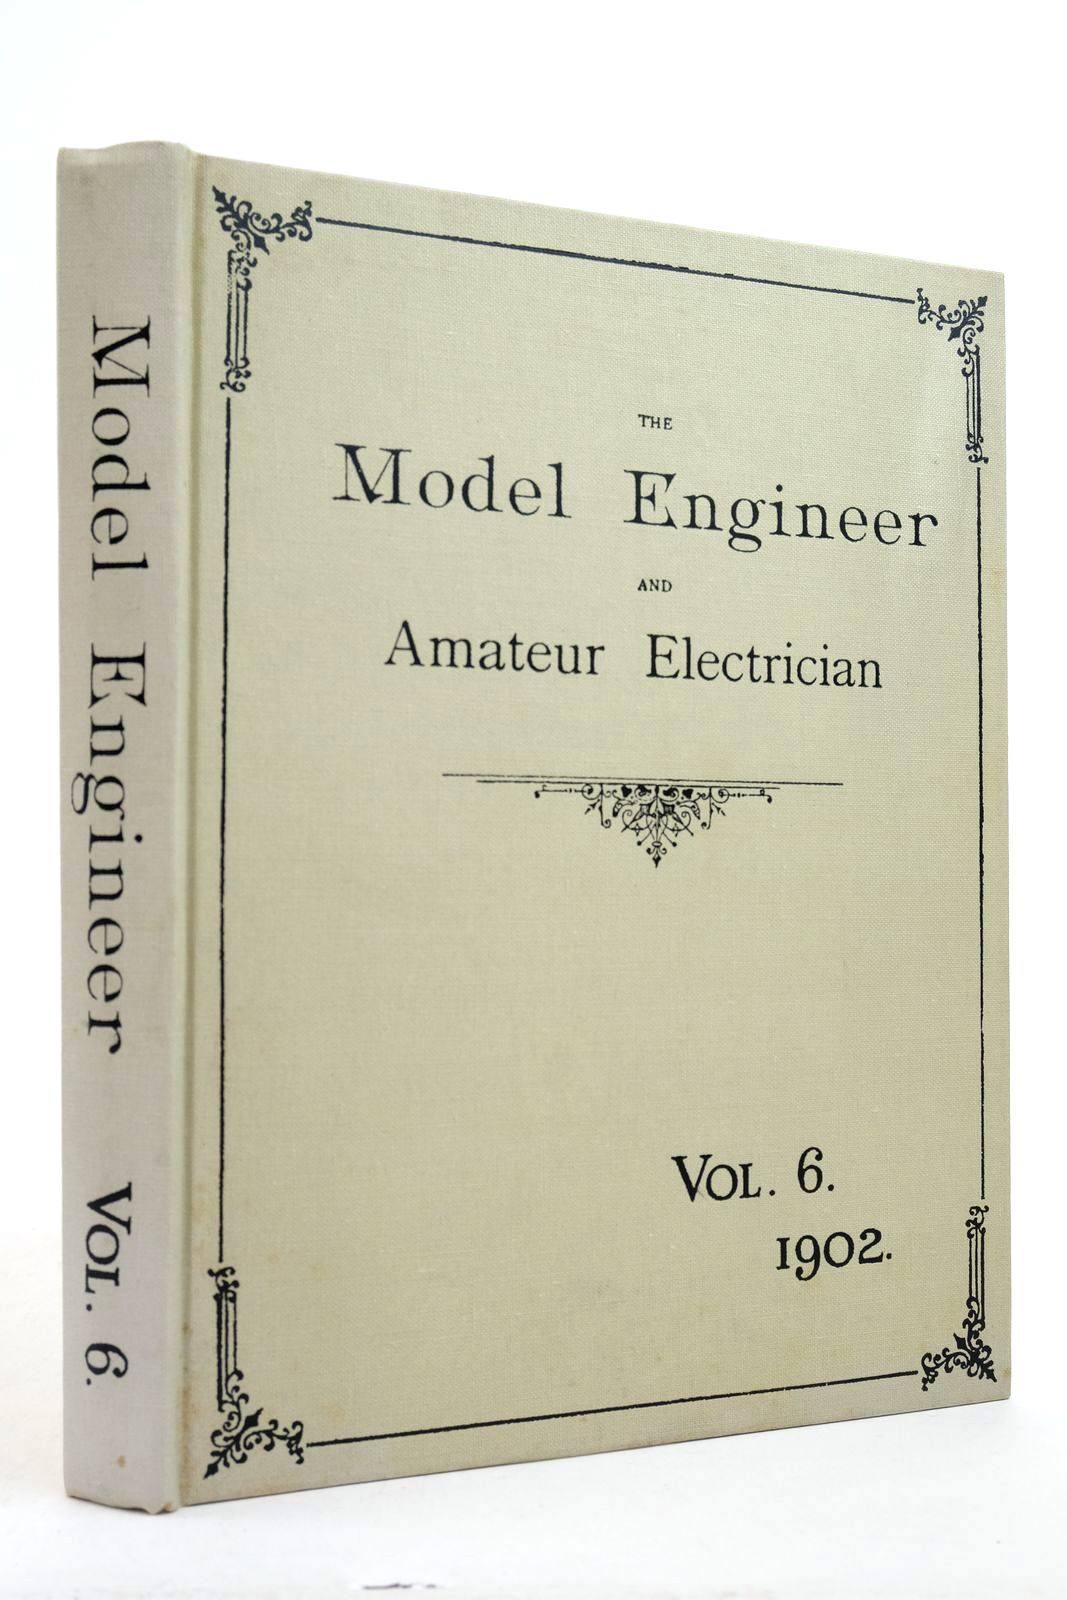 Photo of THE MODEL ENGINEER AND AMATEUR ELECTRICIAN VOL. VI - 1902 written by Marshall, Percival published by Dawbarn & Ward Limited, Argus Books Ltd (STOCK CODE: 2139859)  for sale by Stella & Rose's Books